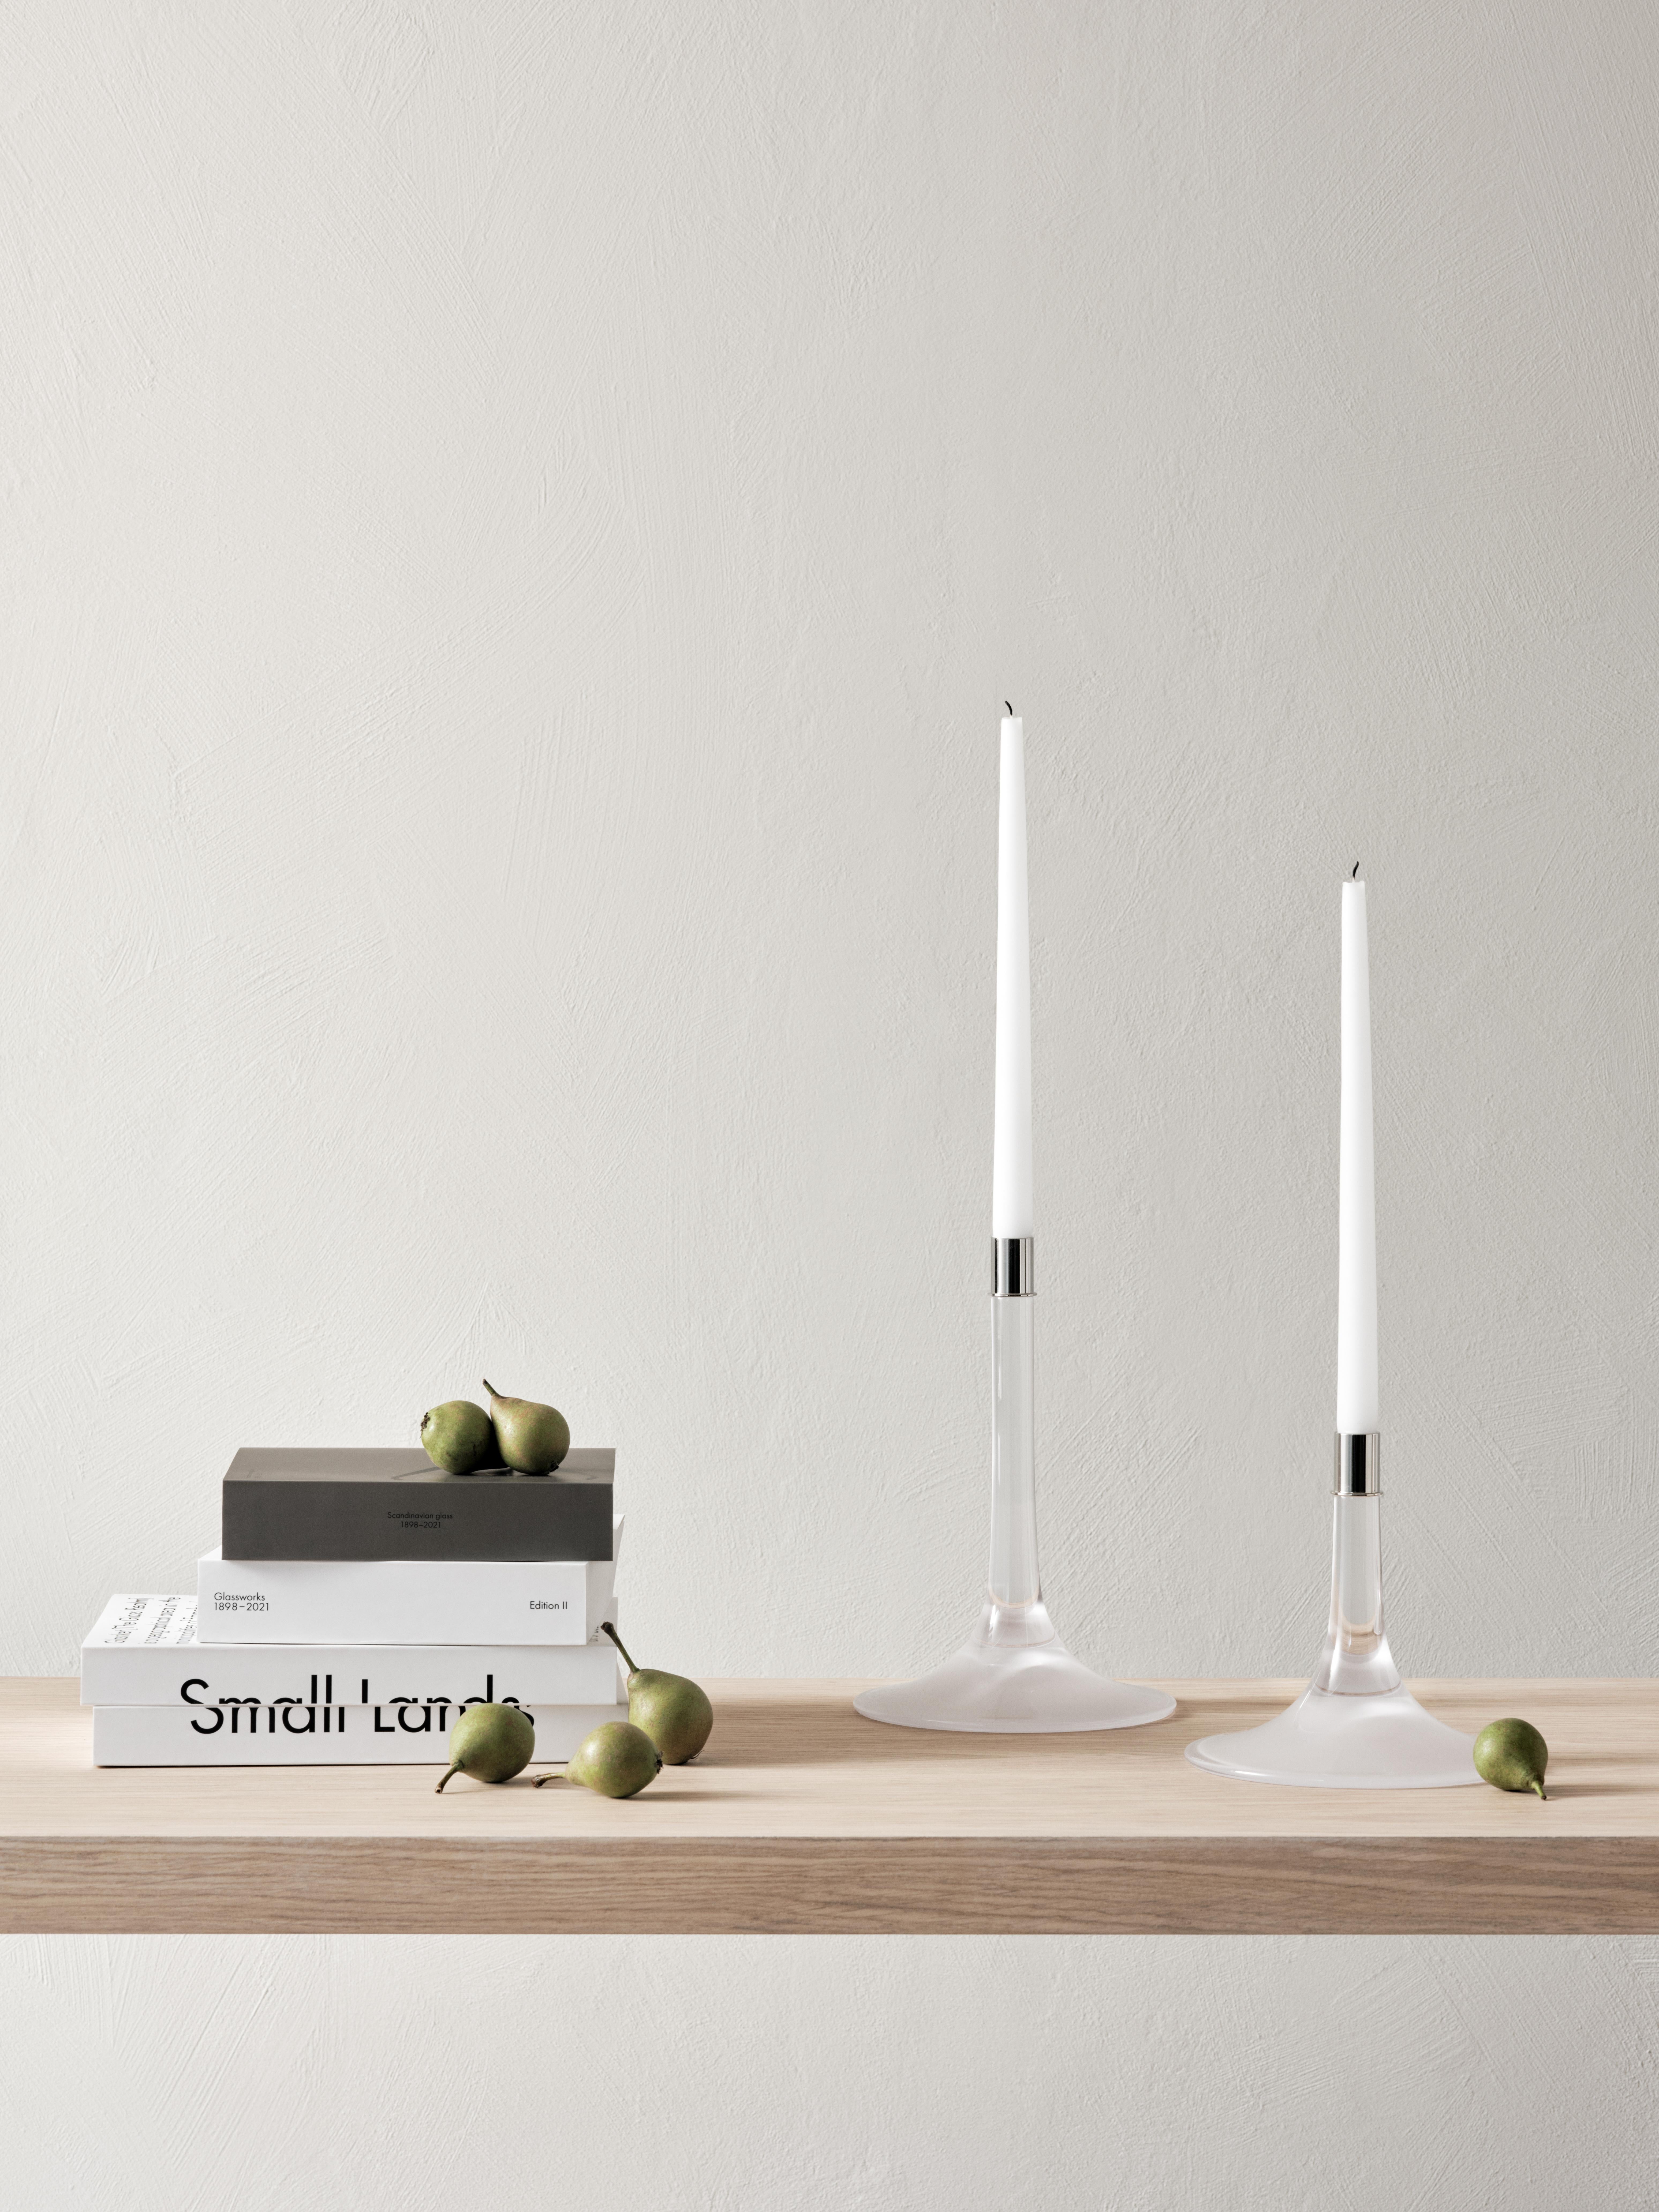 Cirrus Candlestick Medium from Orrefors is a candlestick with a large base, a distinctive feature contributing to its identity. The base with a sandblasted underside provides a soft transition to the clear crystal rod, which refracts and beautifully